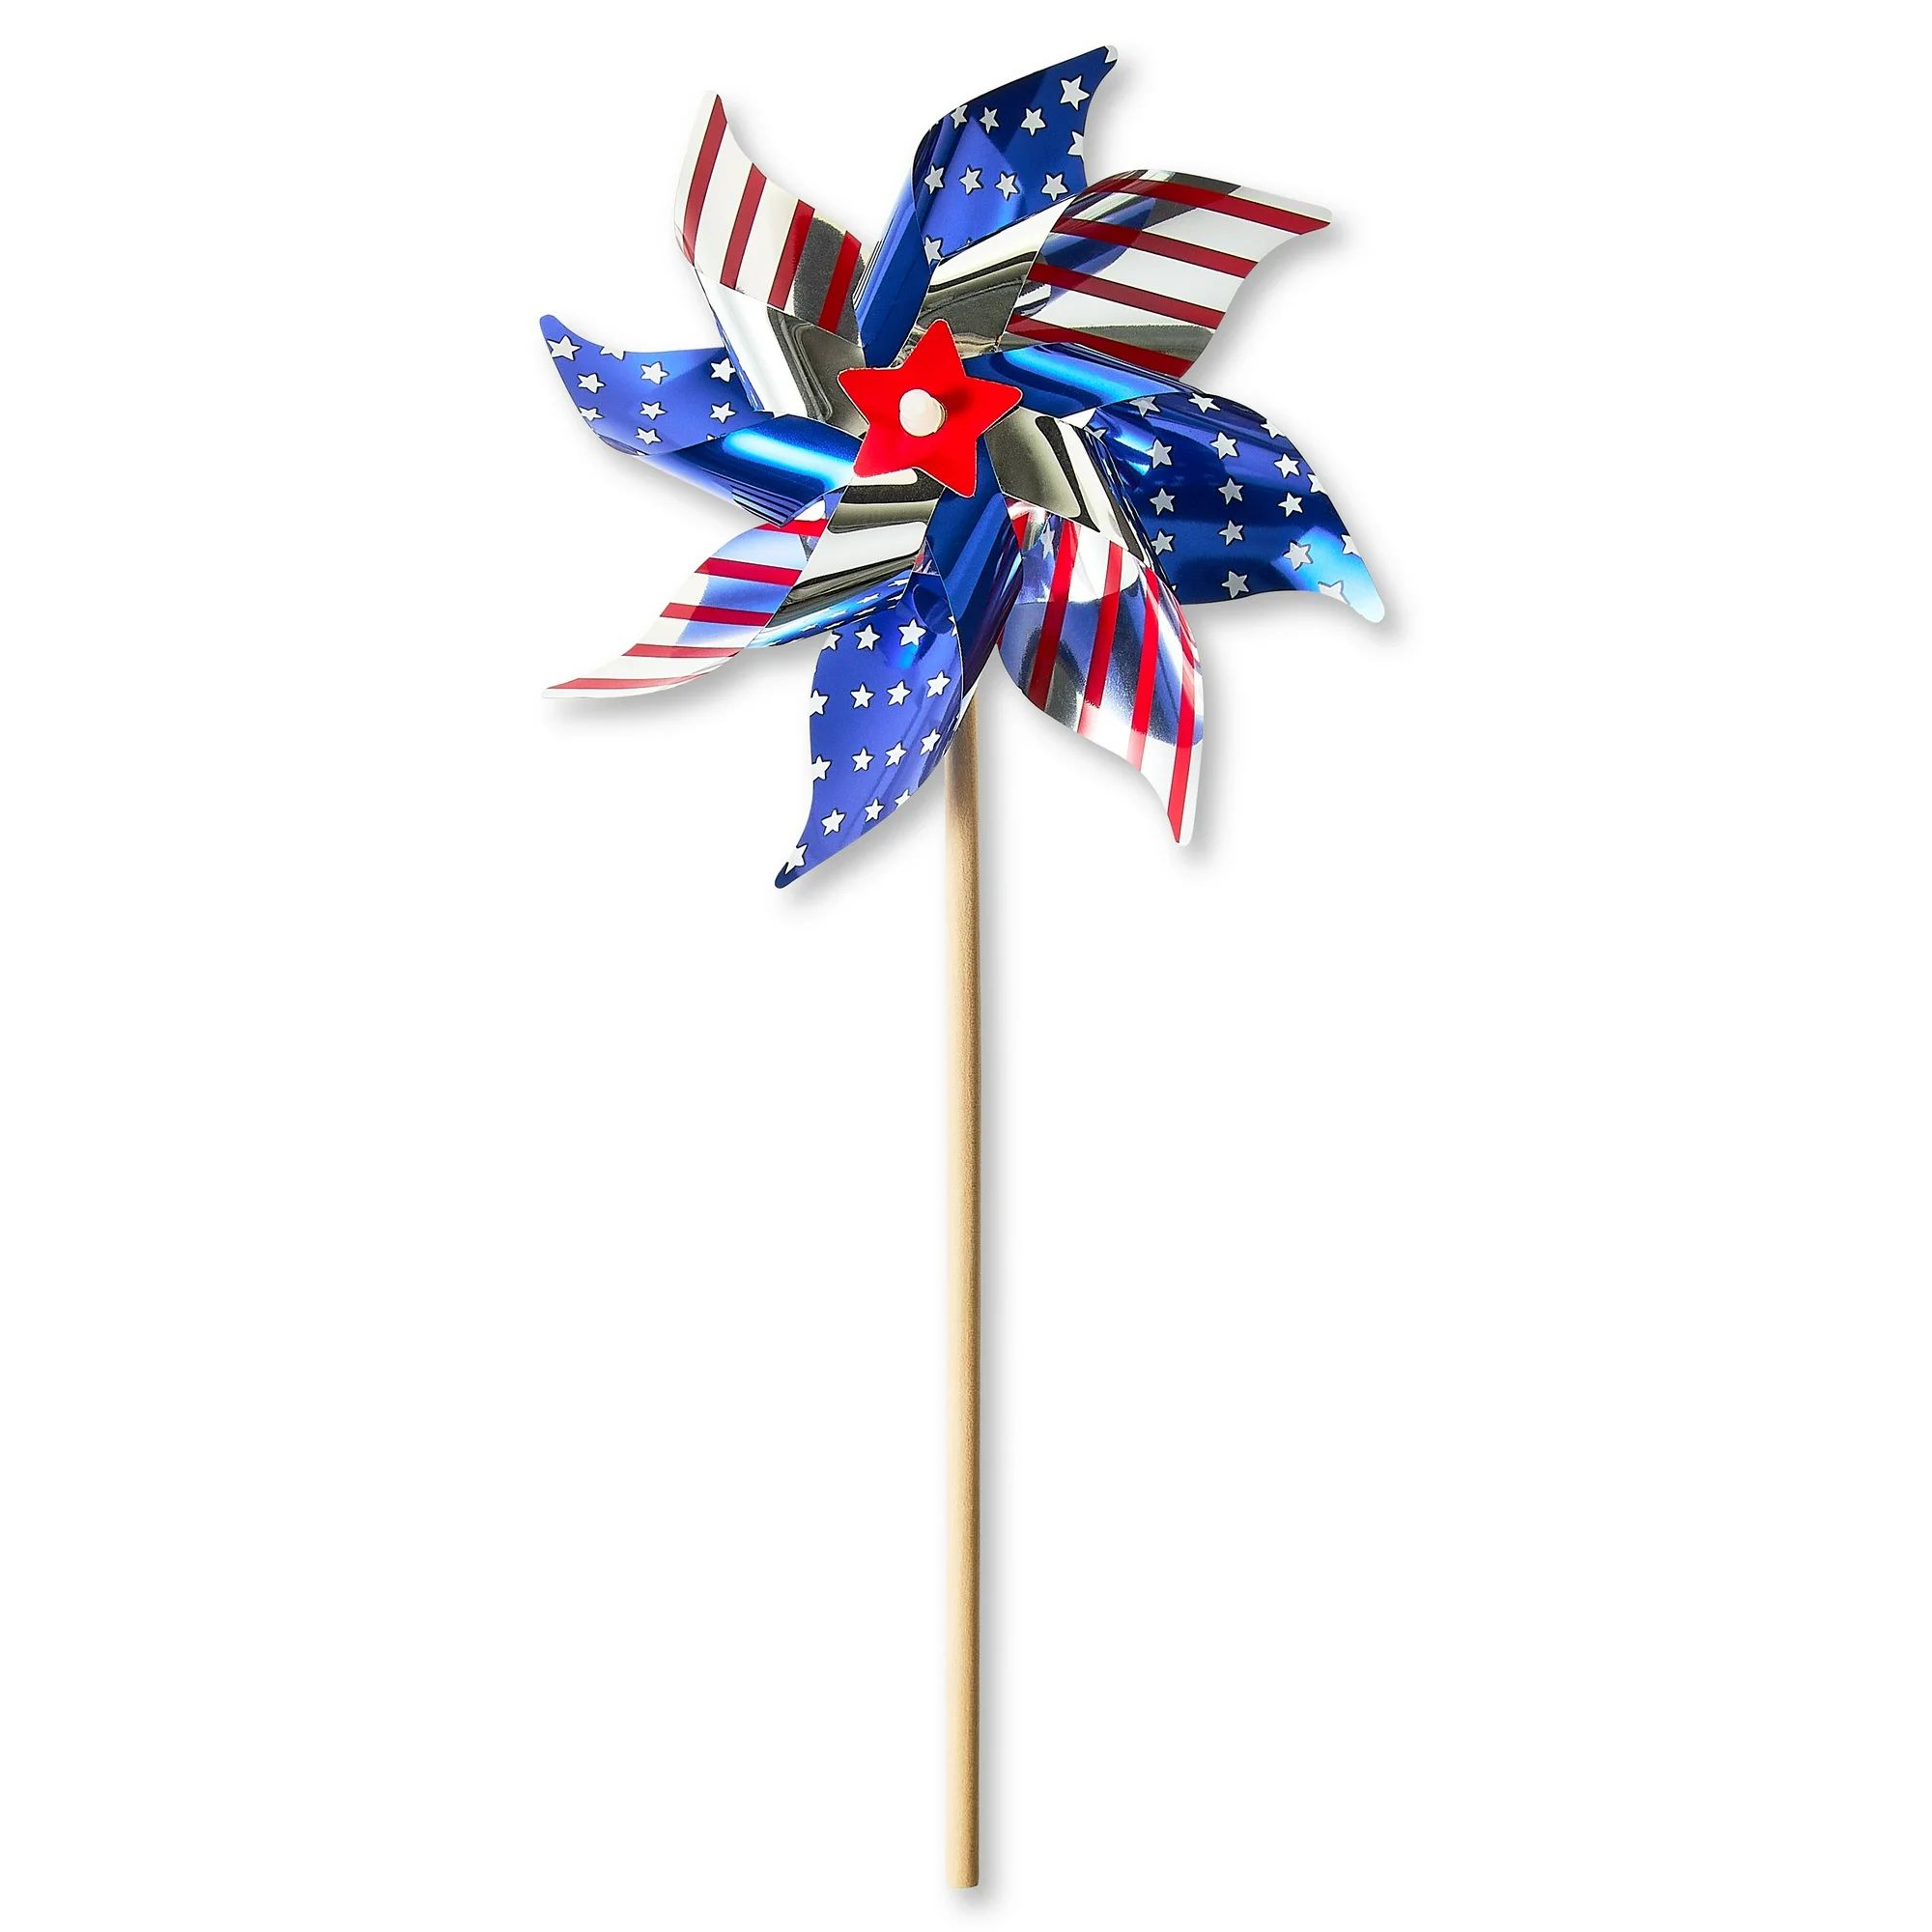 Patriotic 14-in Small Pinwheel, Plastic & Wood, Red, White & Blue color, Way to Celebrate | Walmart (US)